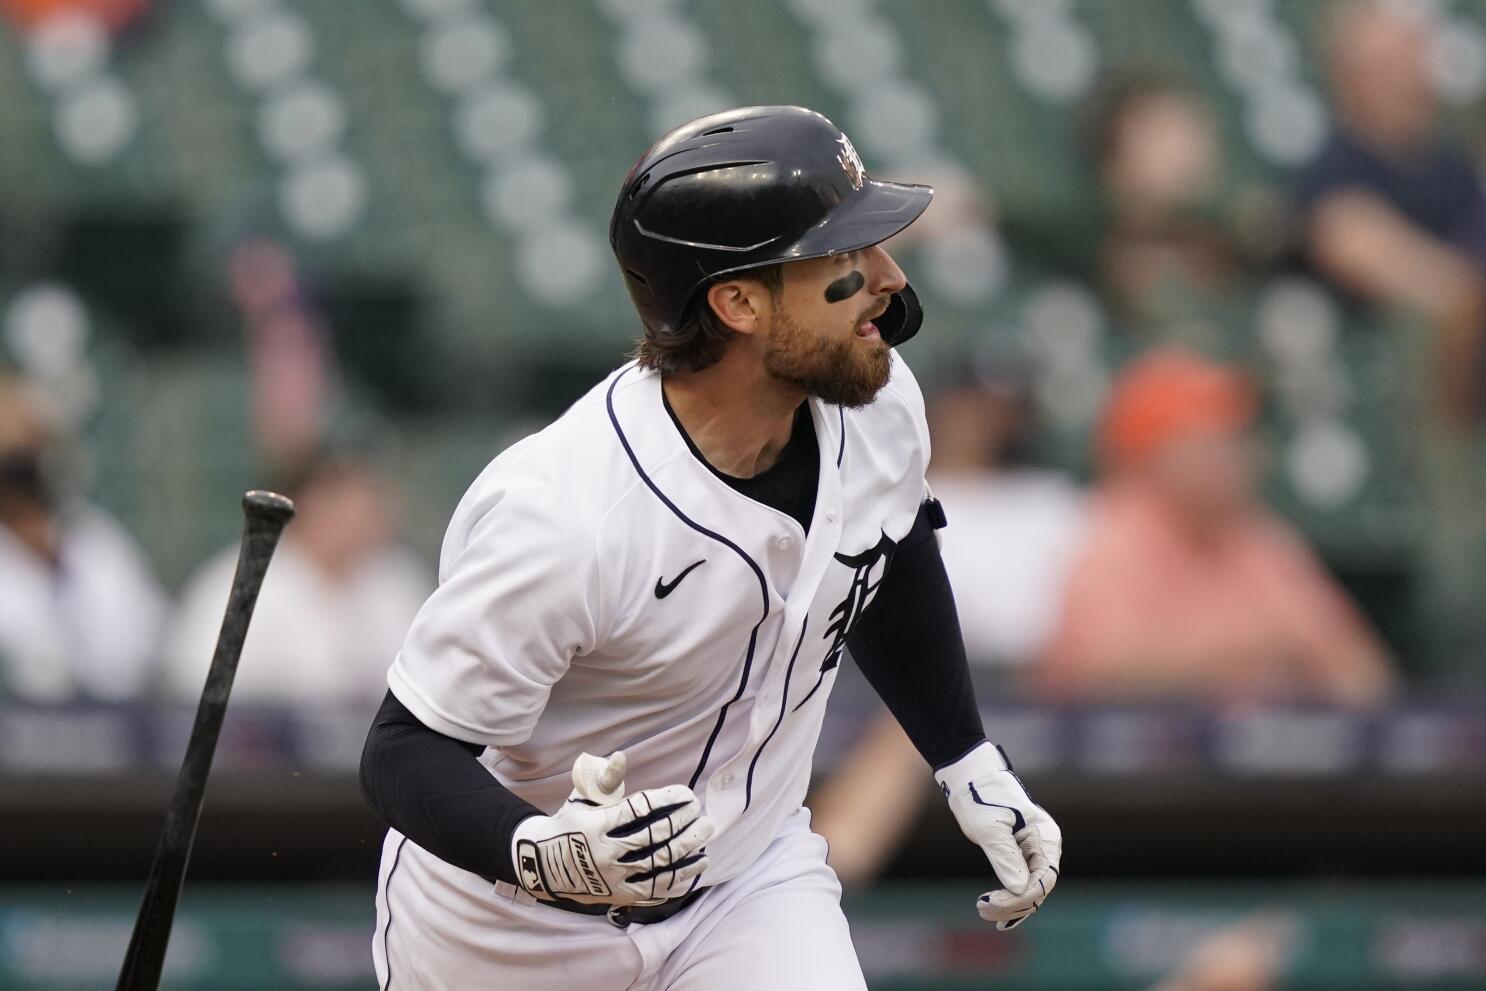 Detroit Tigers: Eric Haase has come out of nowhere in 2021